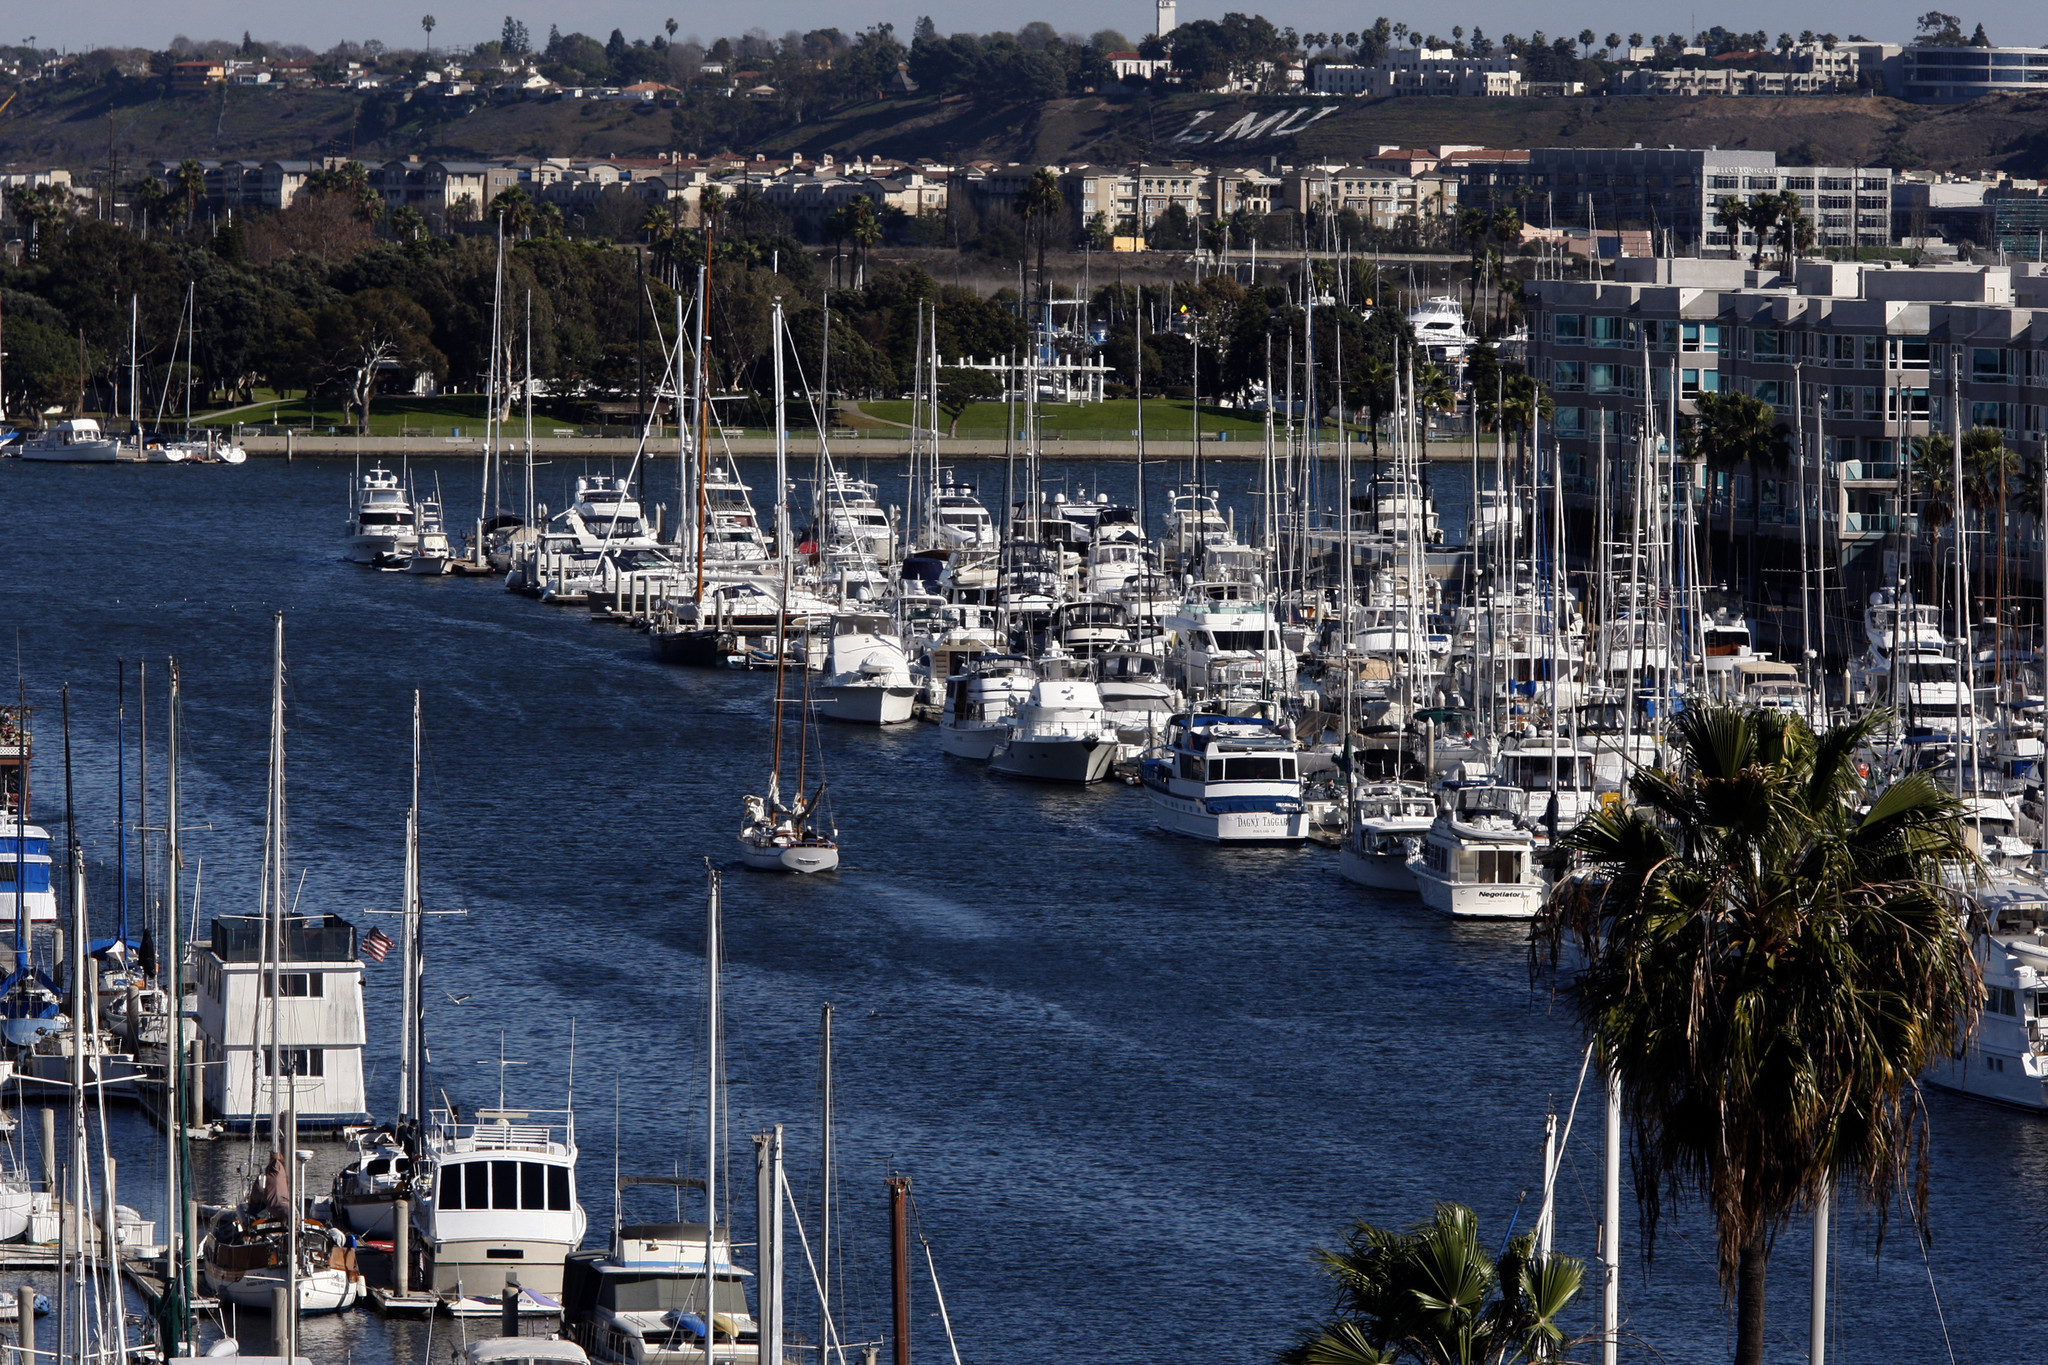 Marina del Rey pollution cleanup approved over boaters' objections.